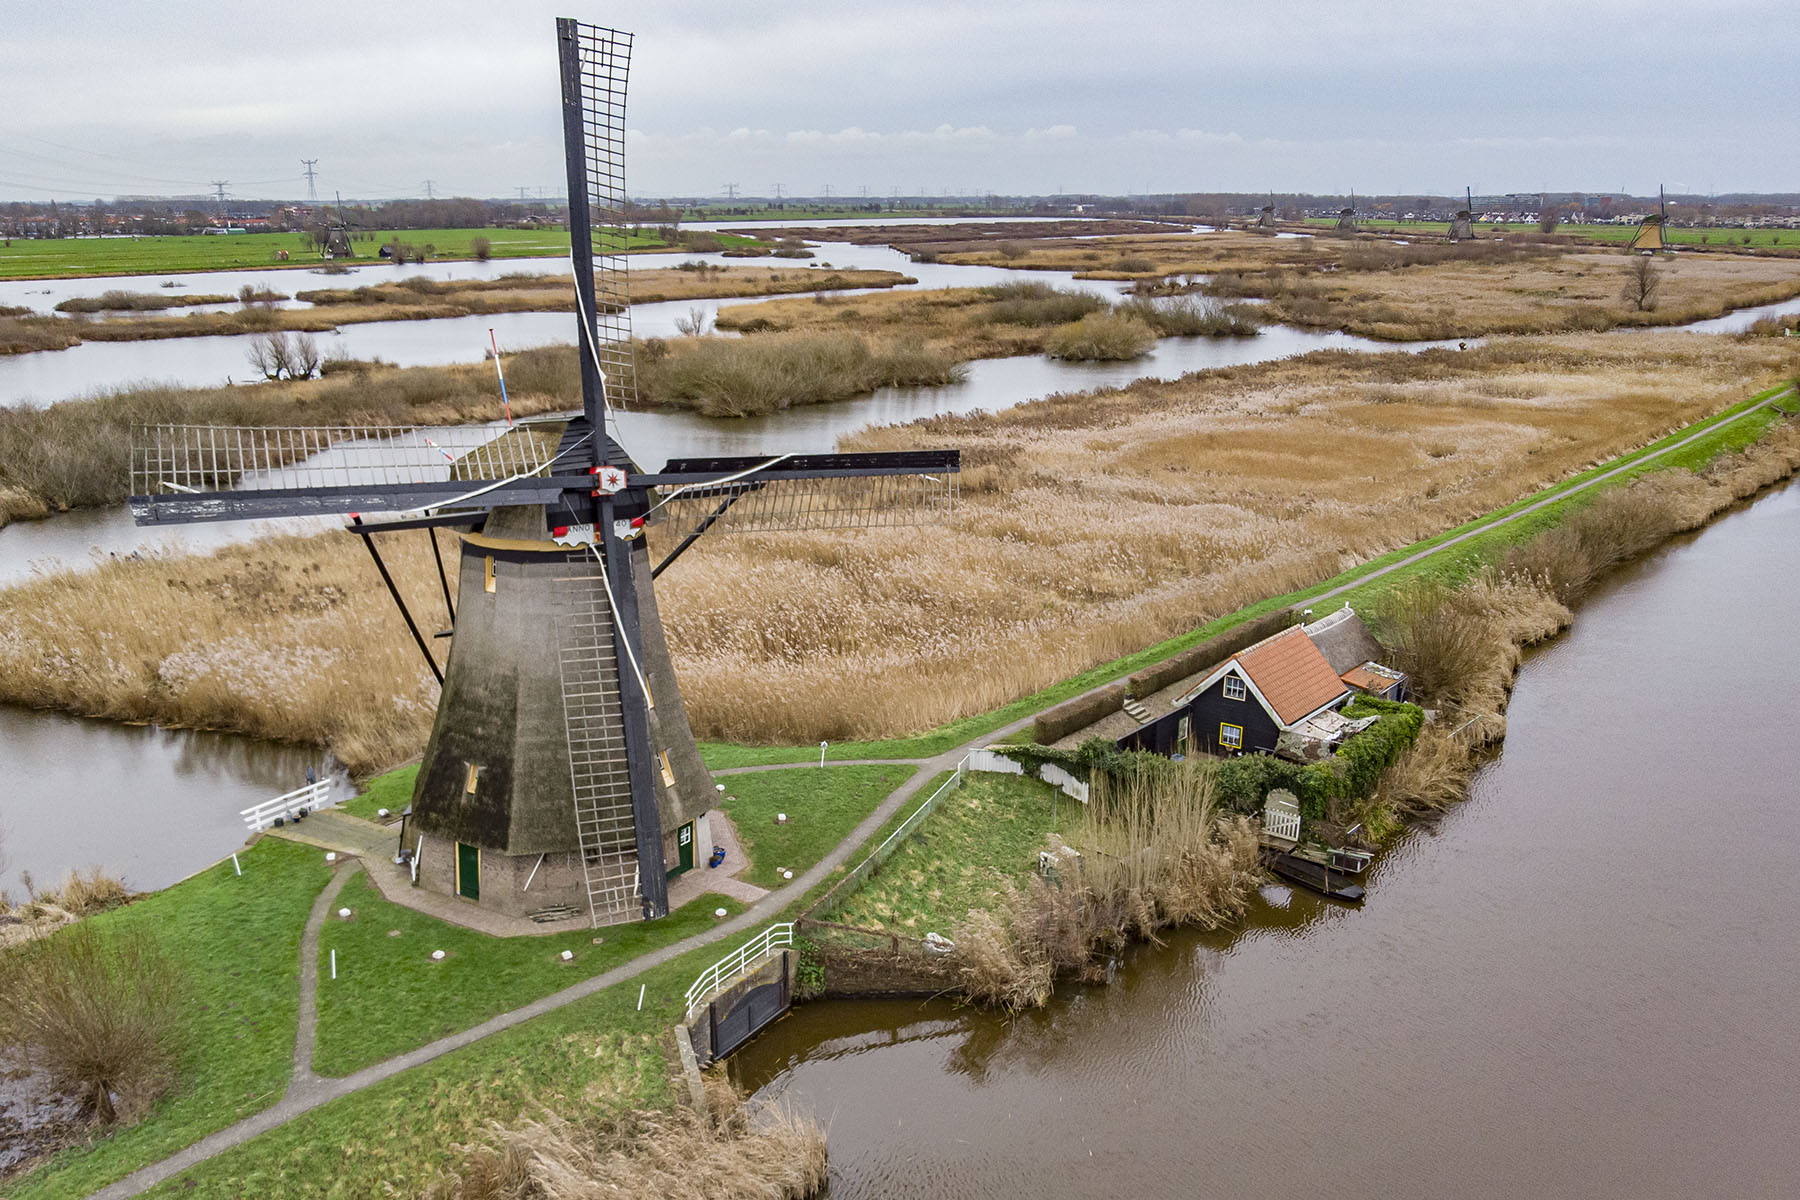 View of stereotypical windmills in the Netherlands. 